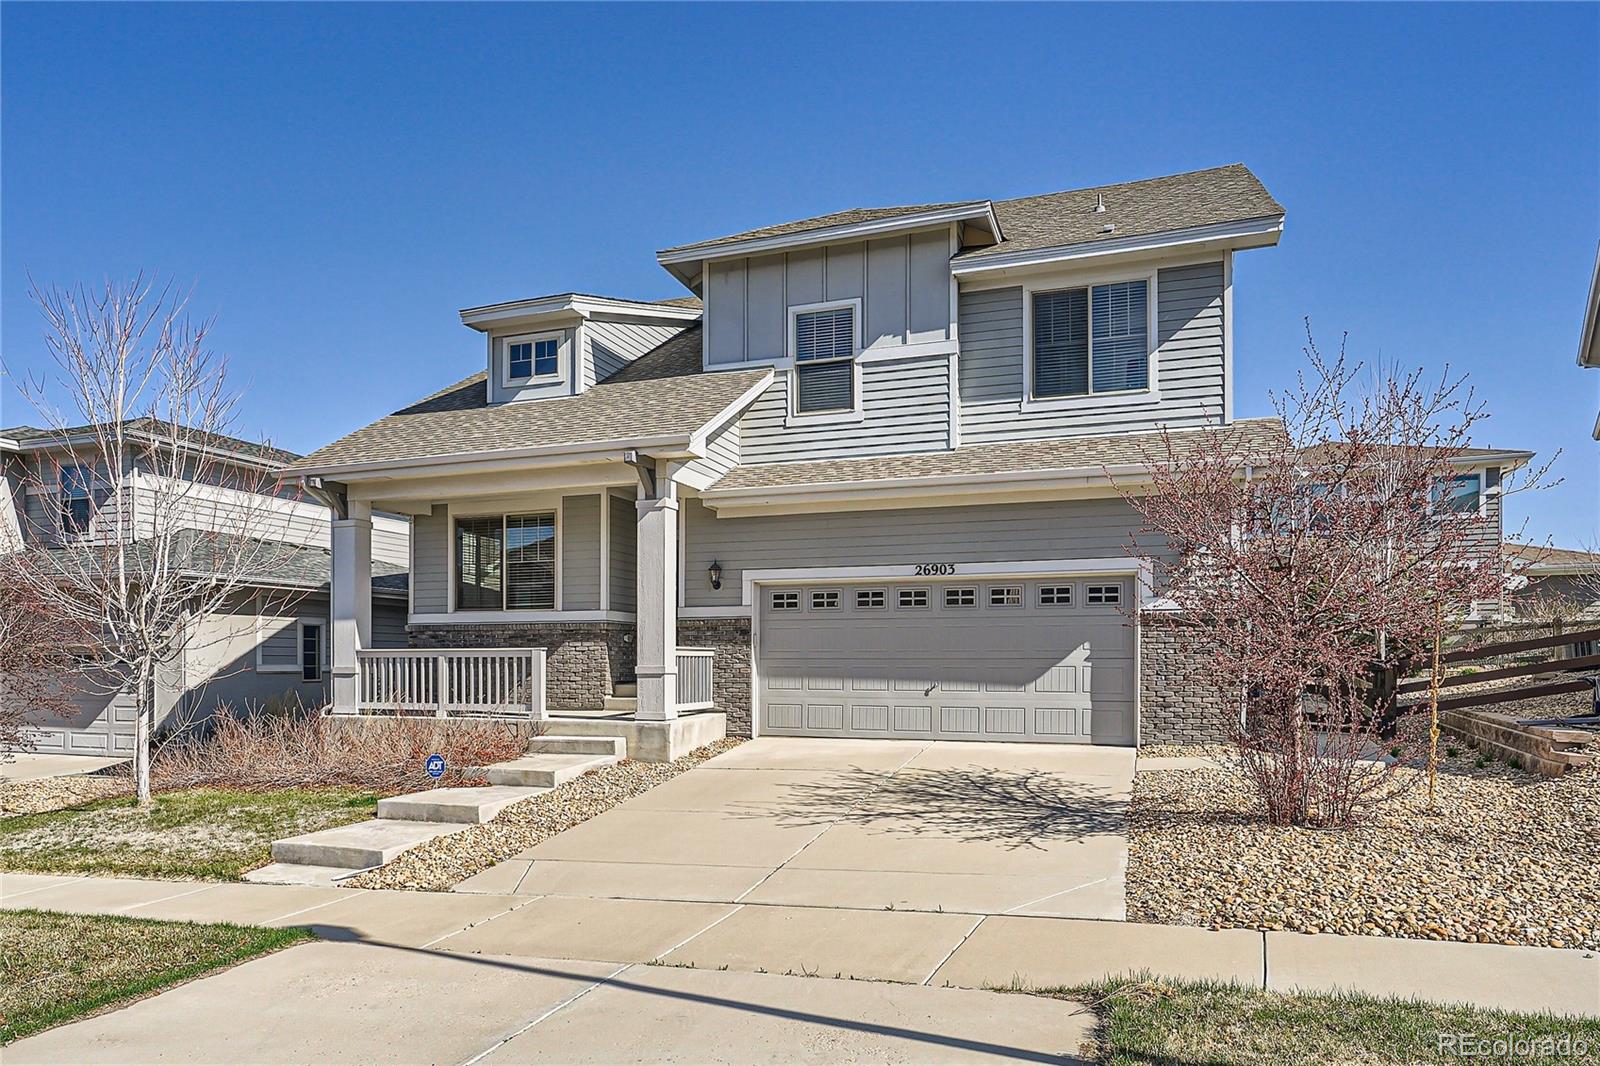 26903 E Easter Place, aurora MLS: 8273216 Beds: 5 Baths: 4 Price: $730,000